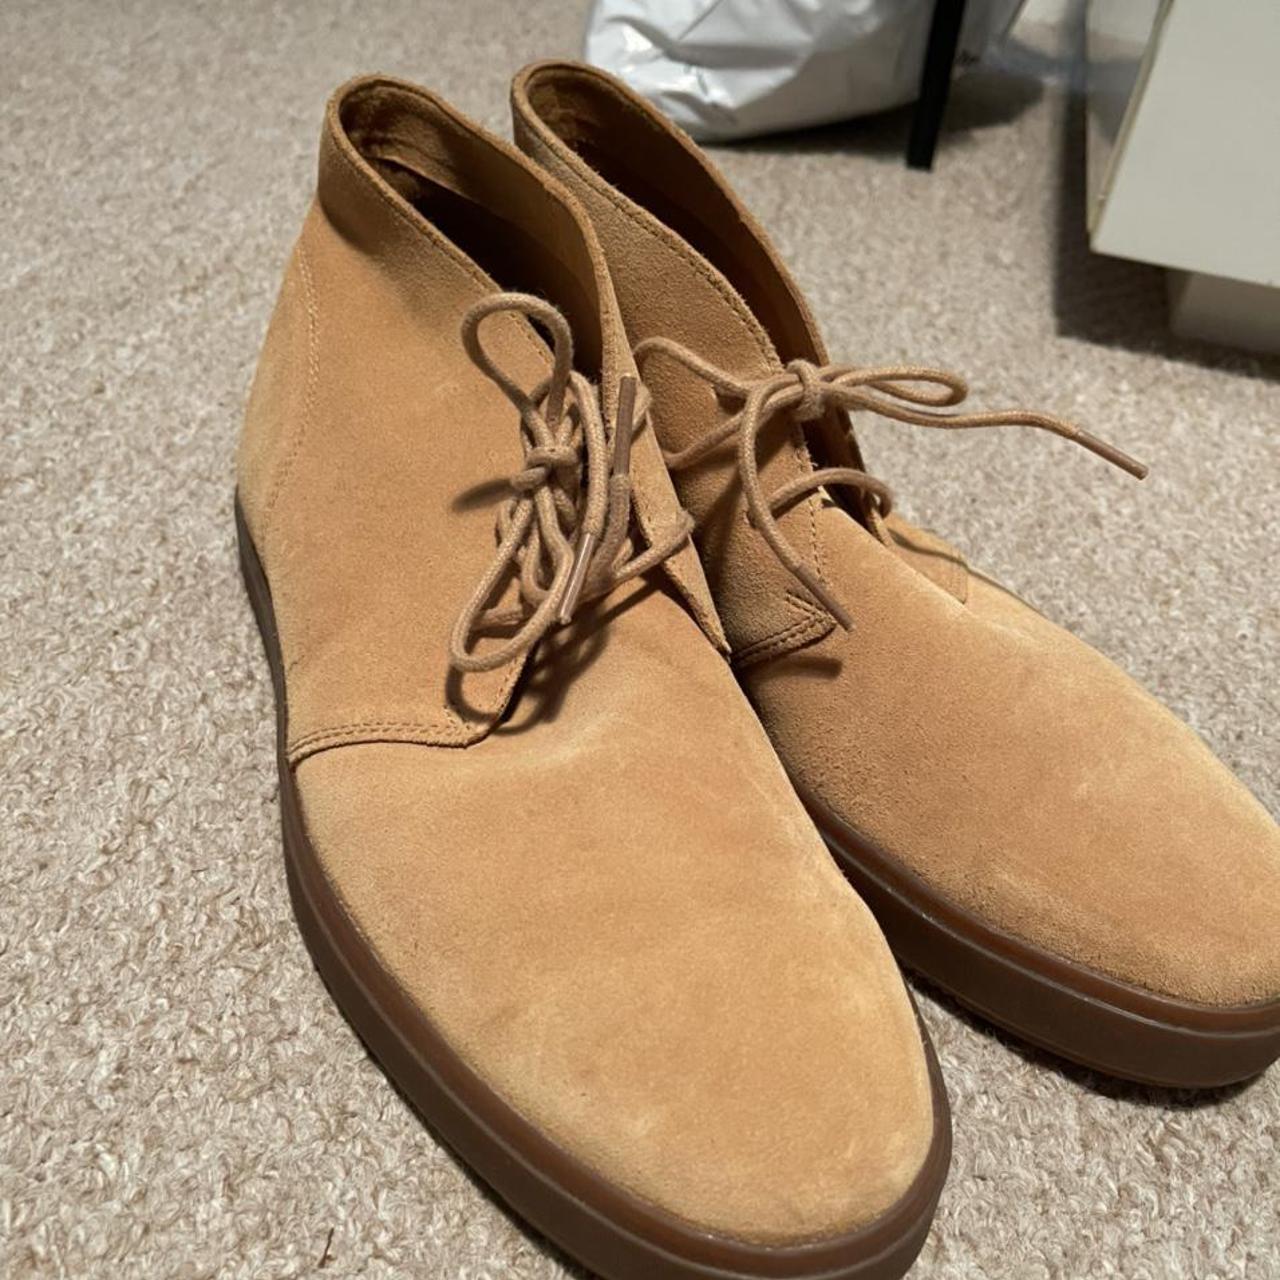 Product Image 1 - Clarks men’s suede boots

Worn once